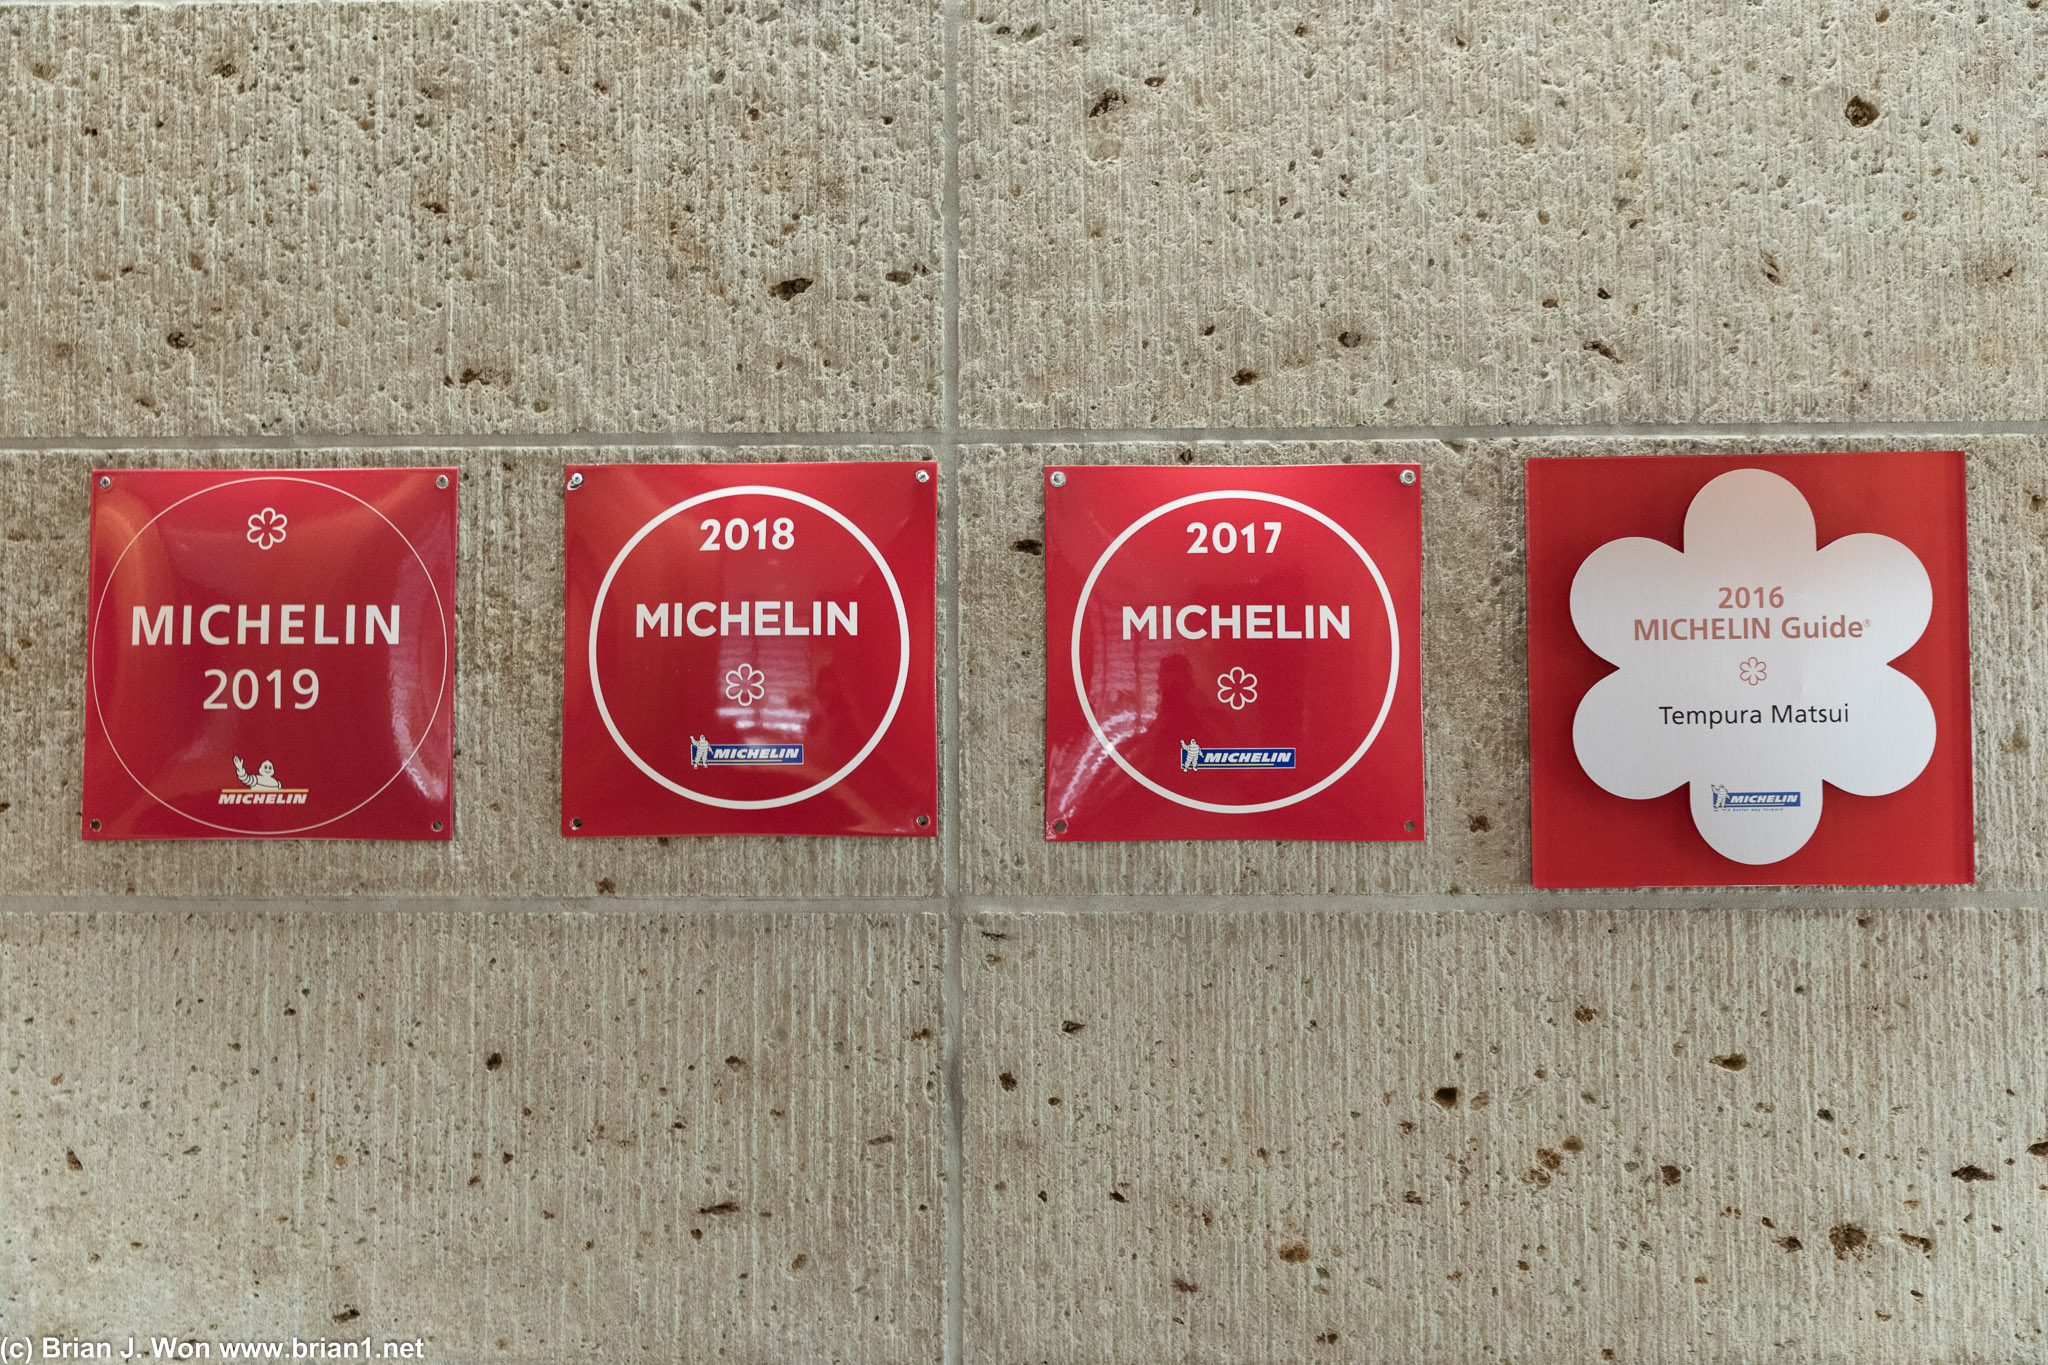 Michelin 1* three years in a row.